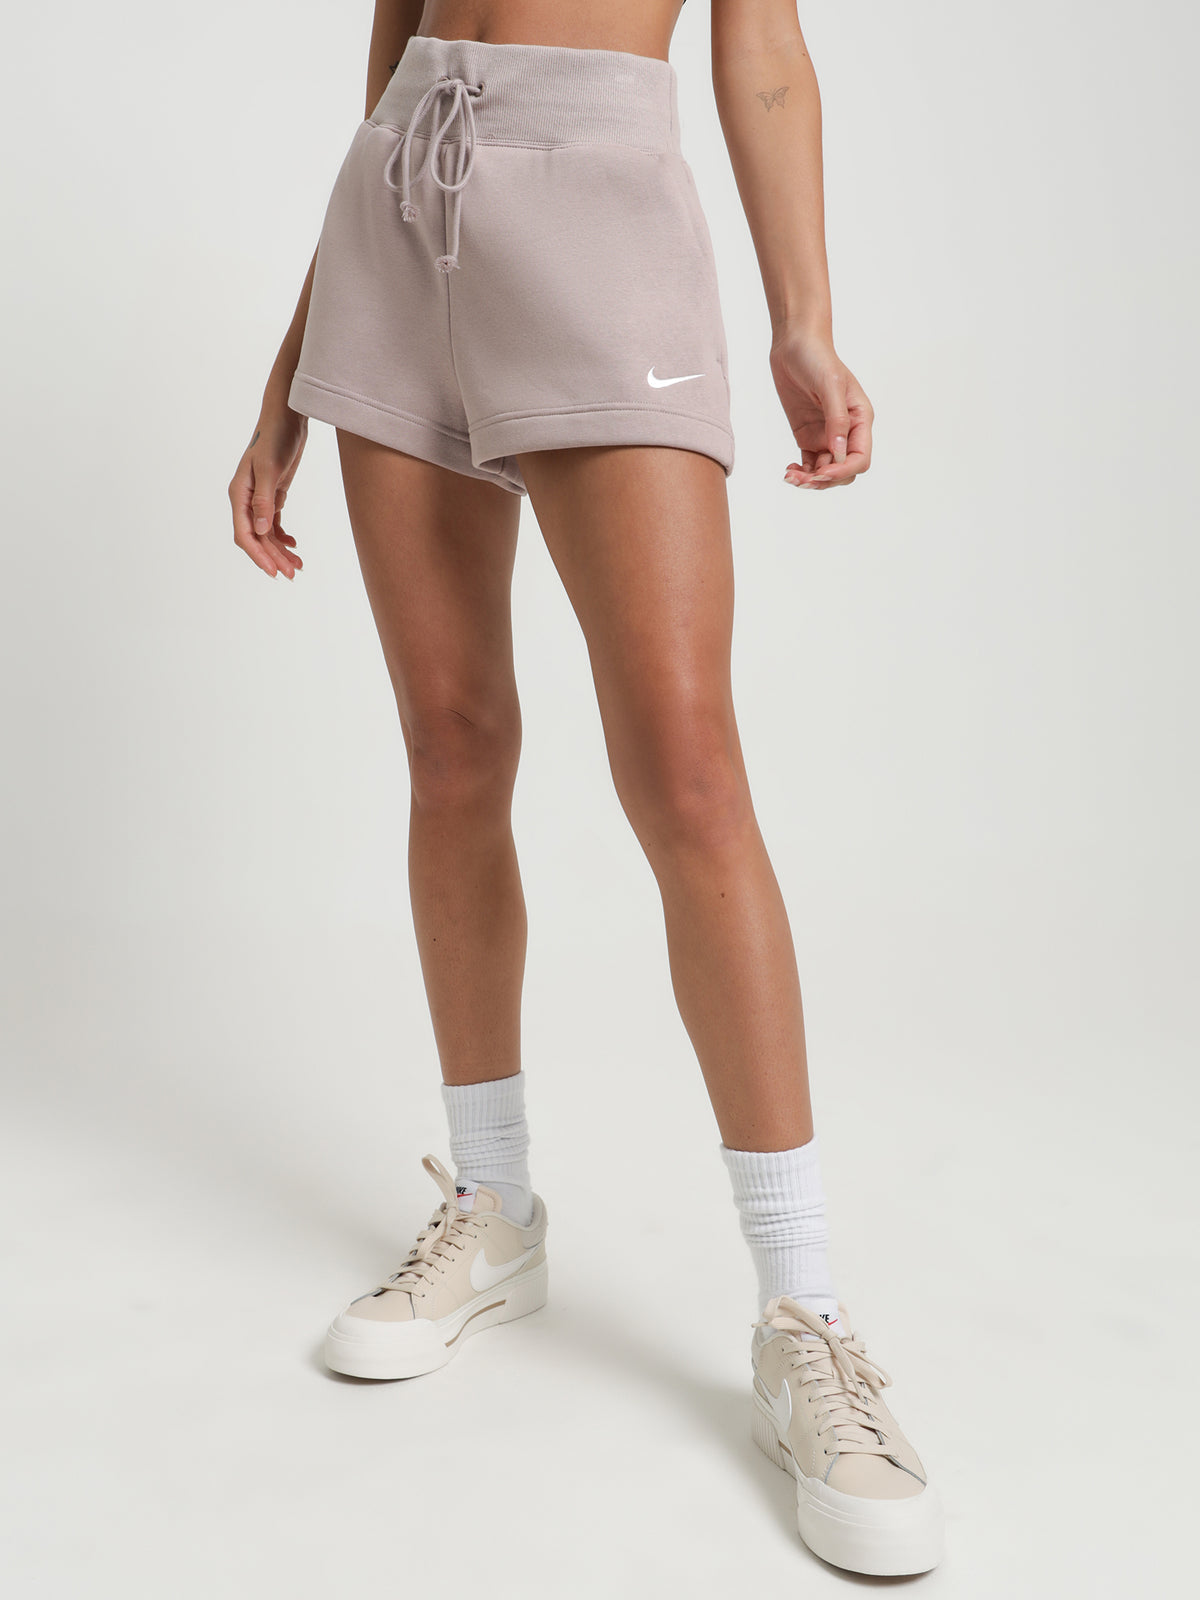 Sportswear Phoenix Fleece Highrise Shorts in Glue Store Taupe Diffused 